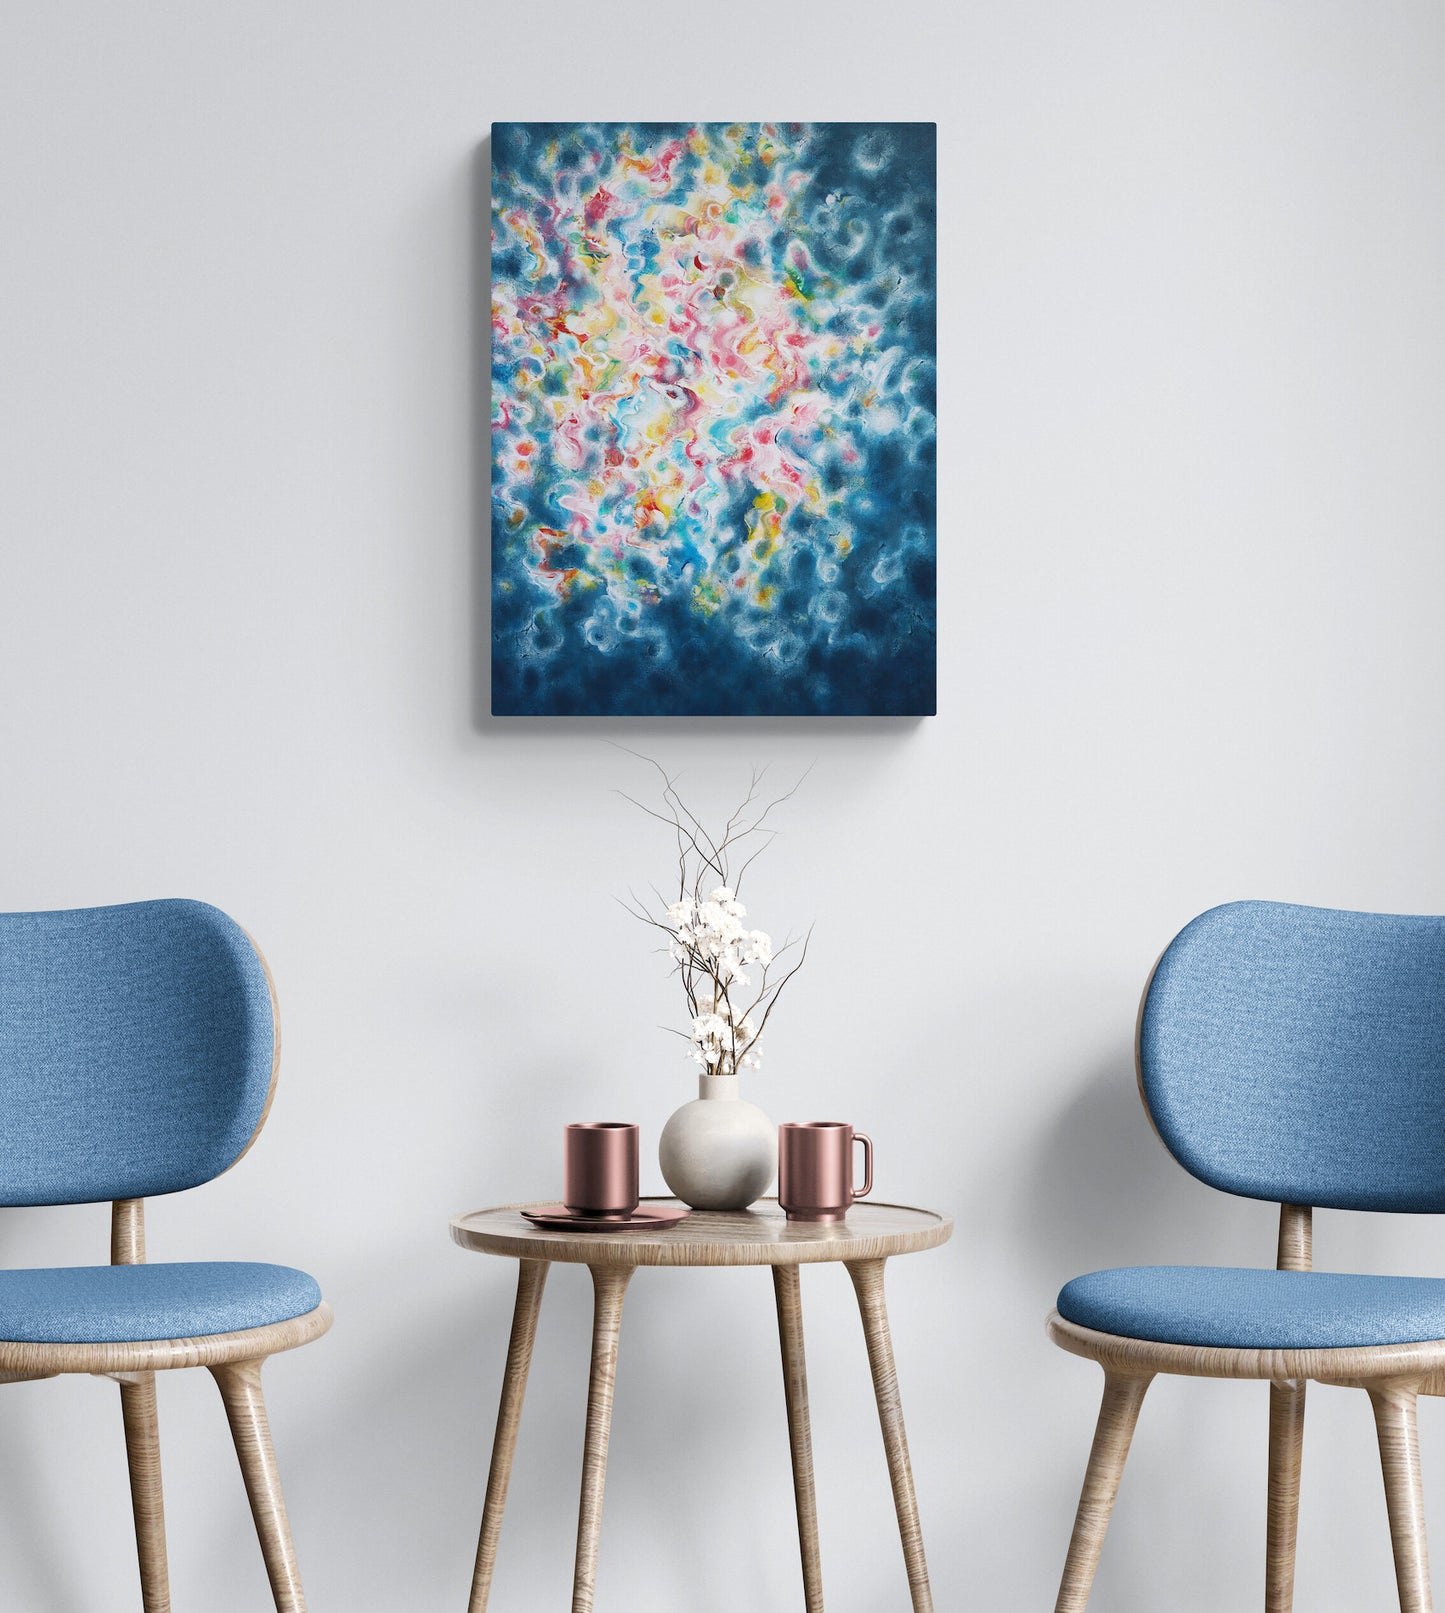 Uplifting colourful painting on canvas